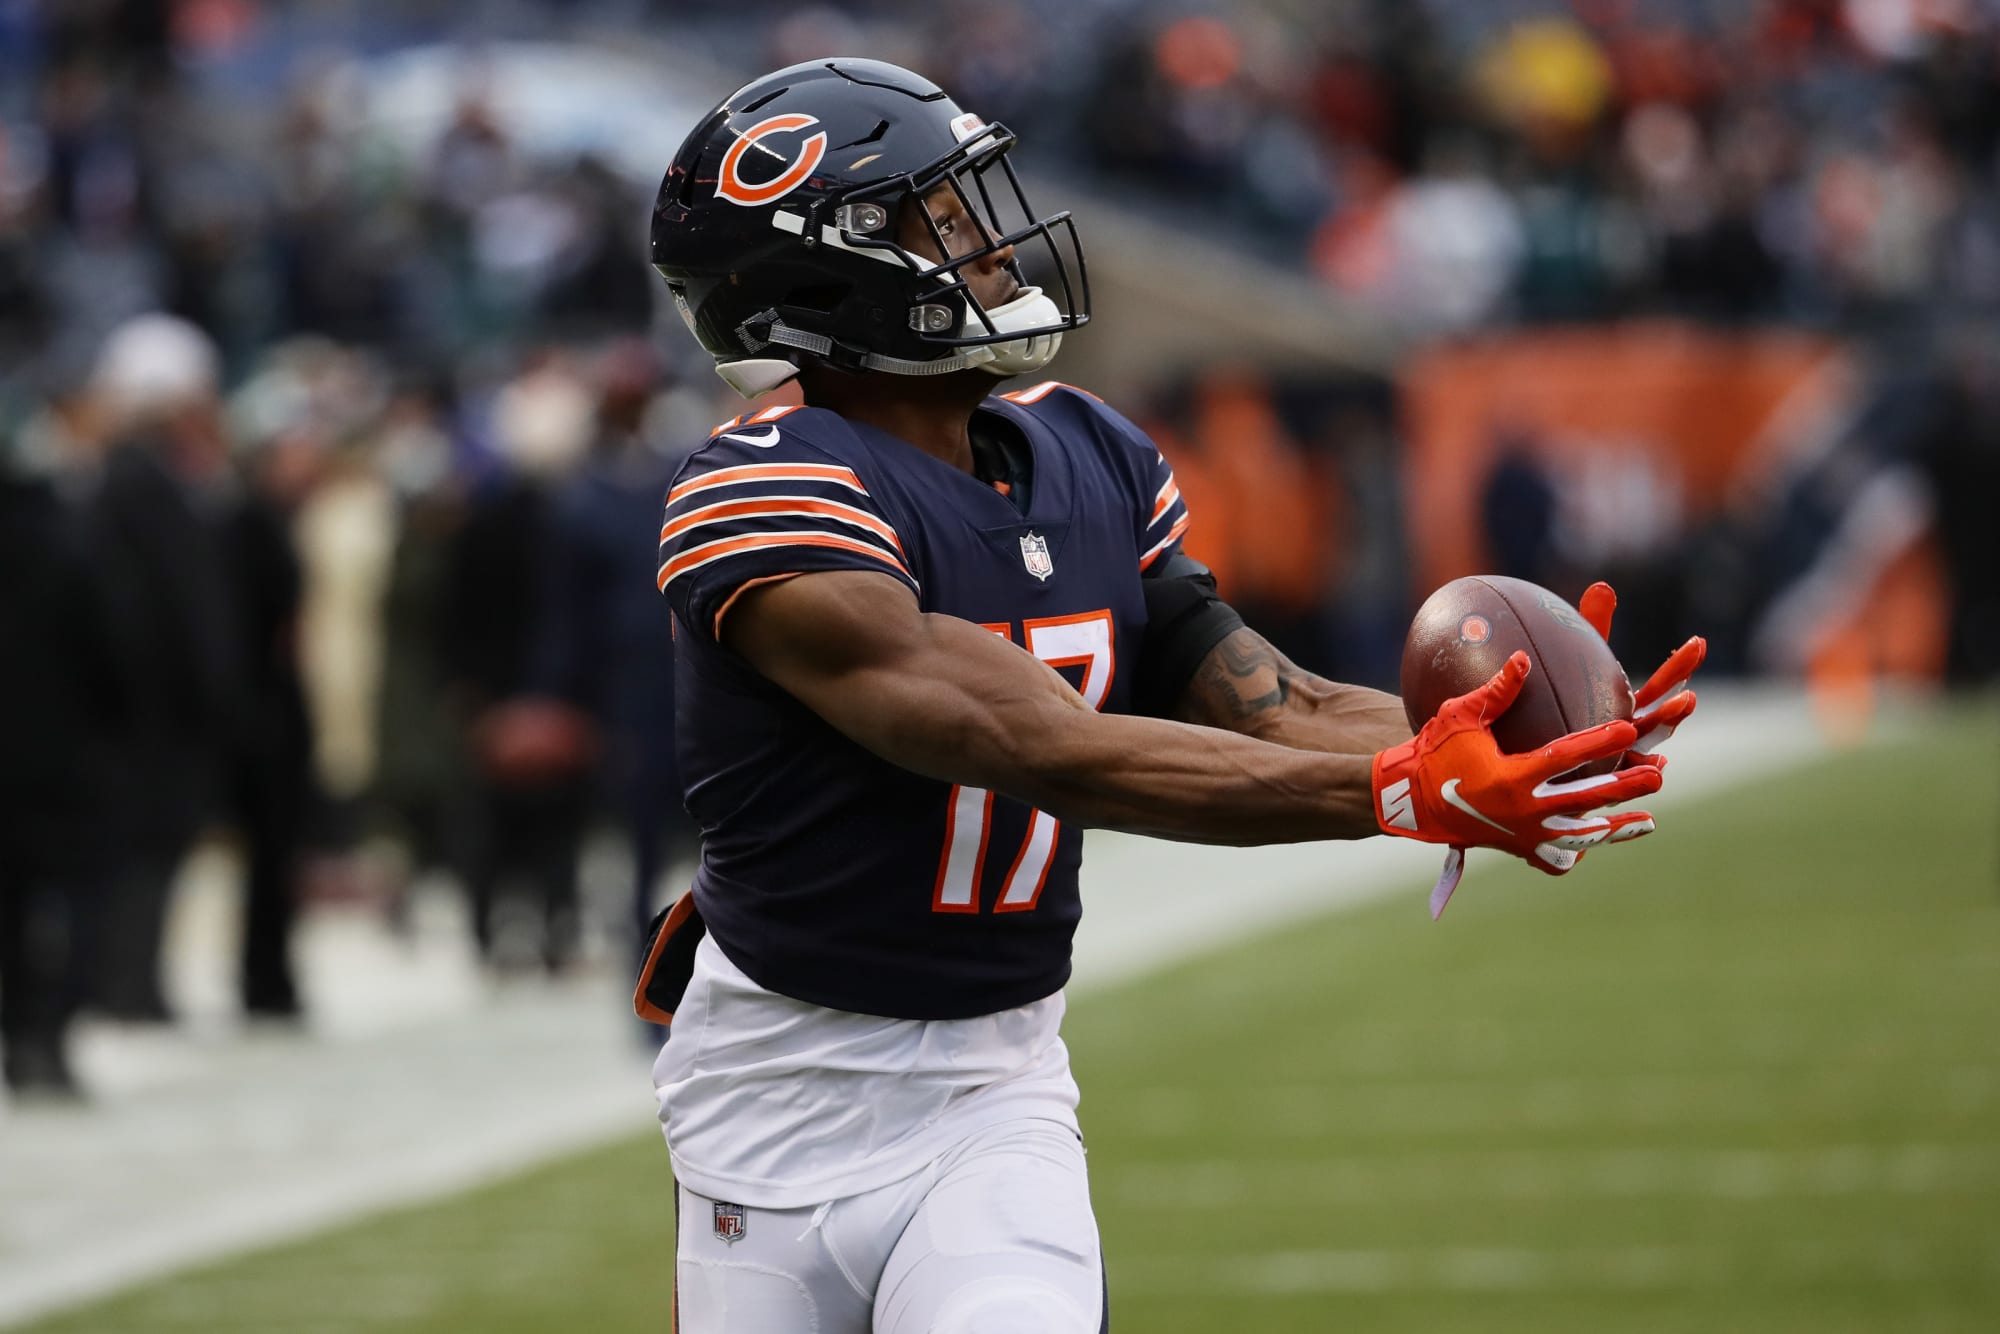 Bears Wide receivers finally show out in win over Giants